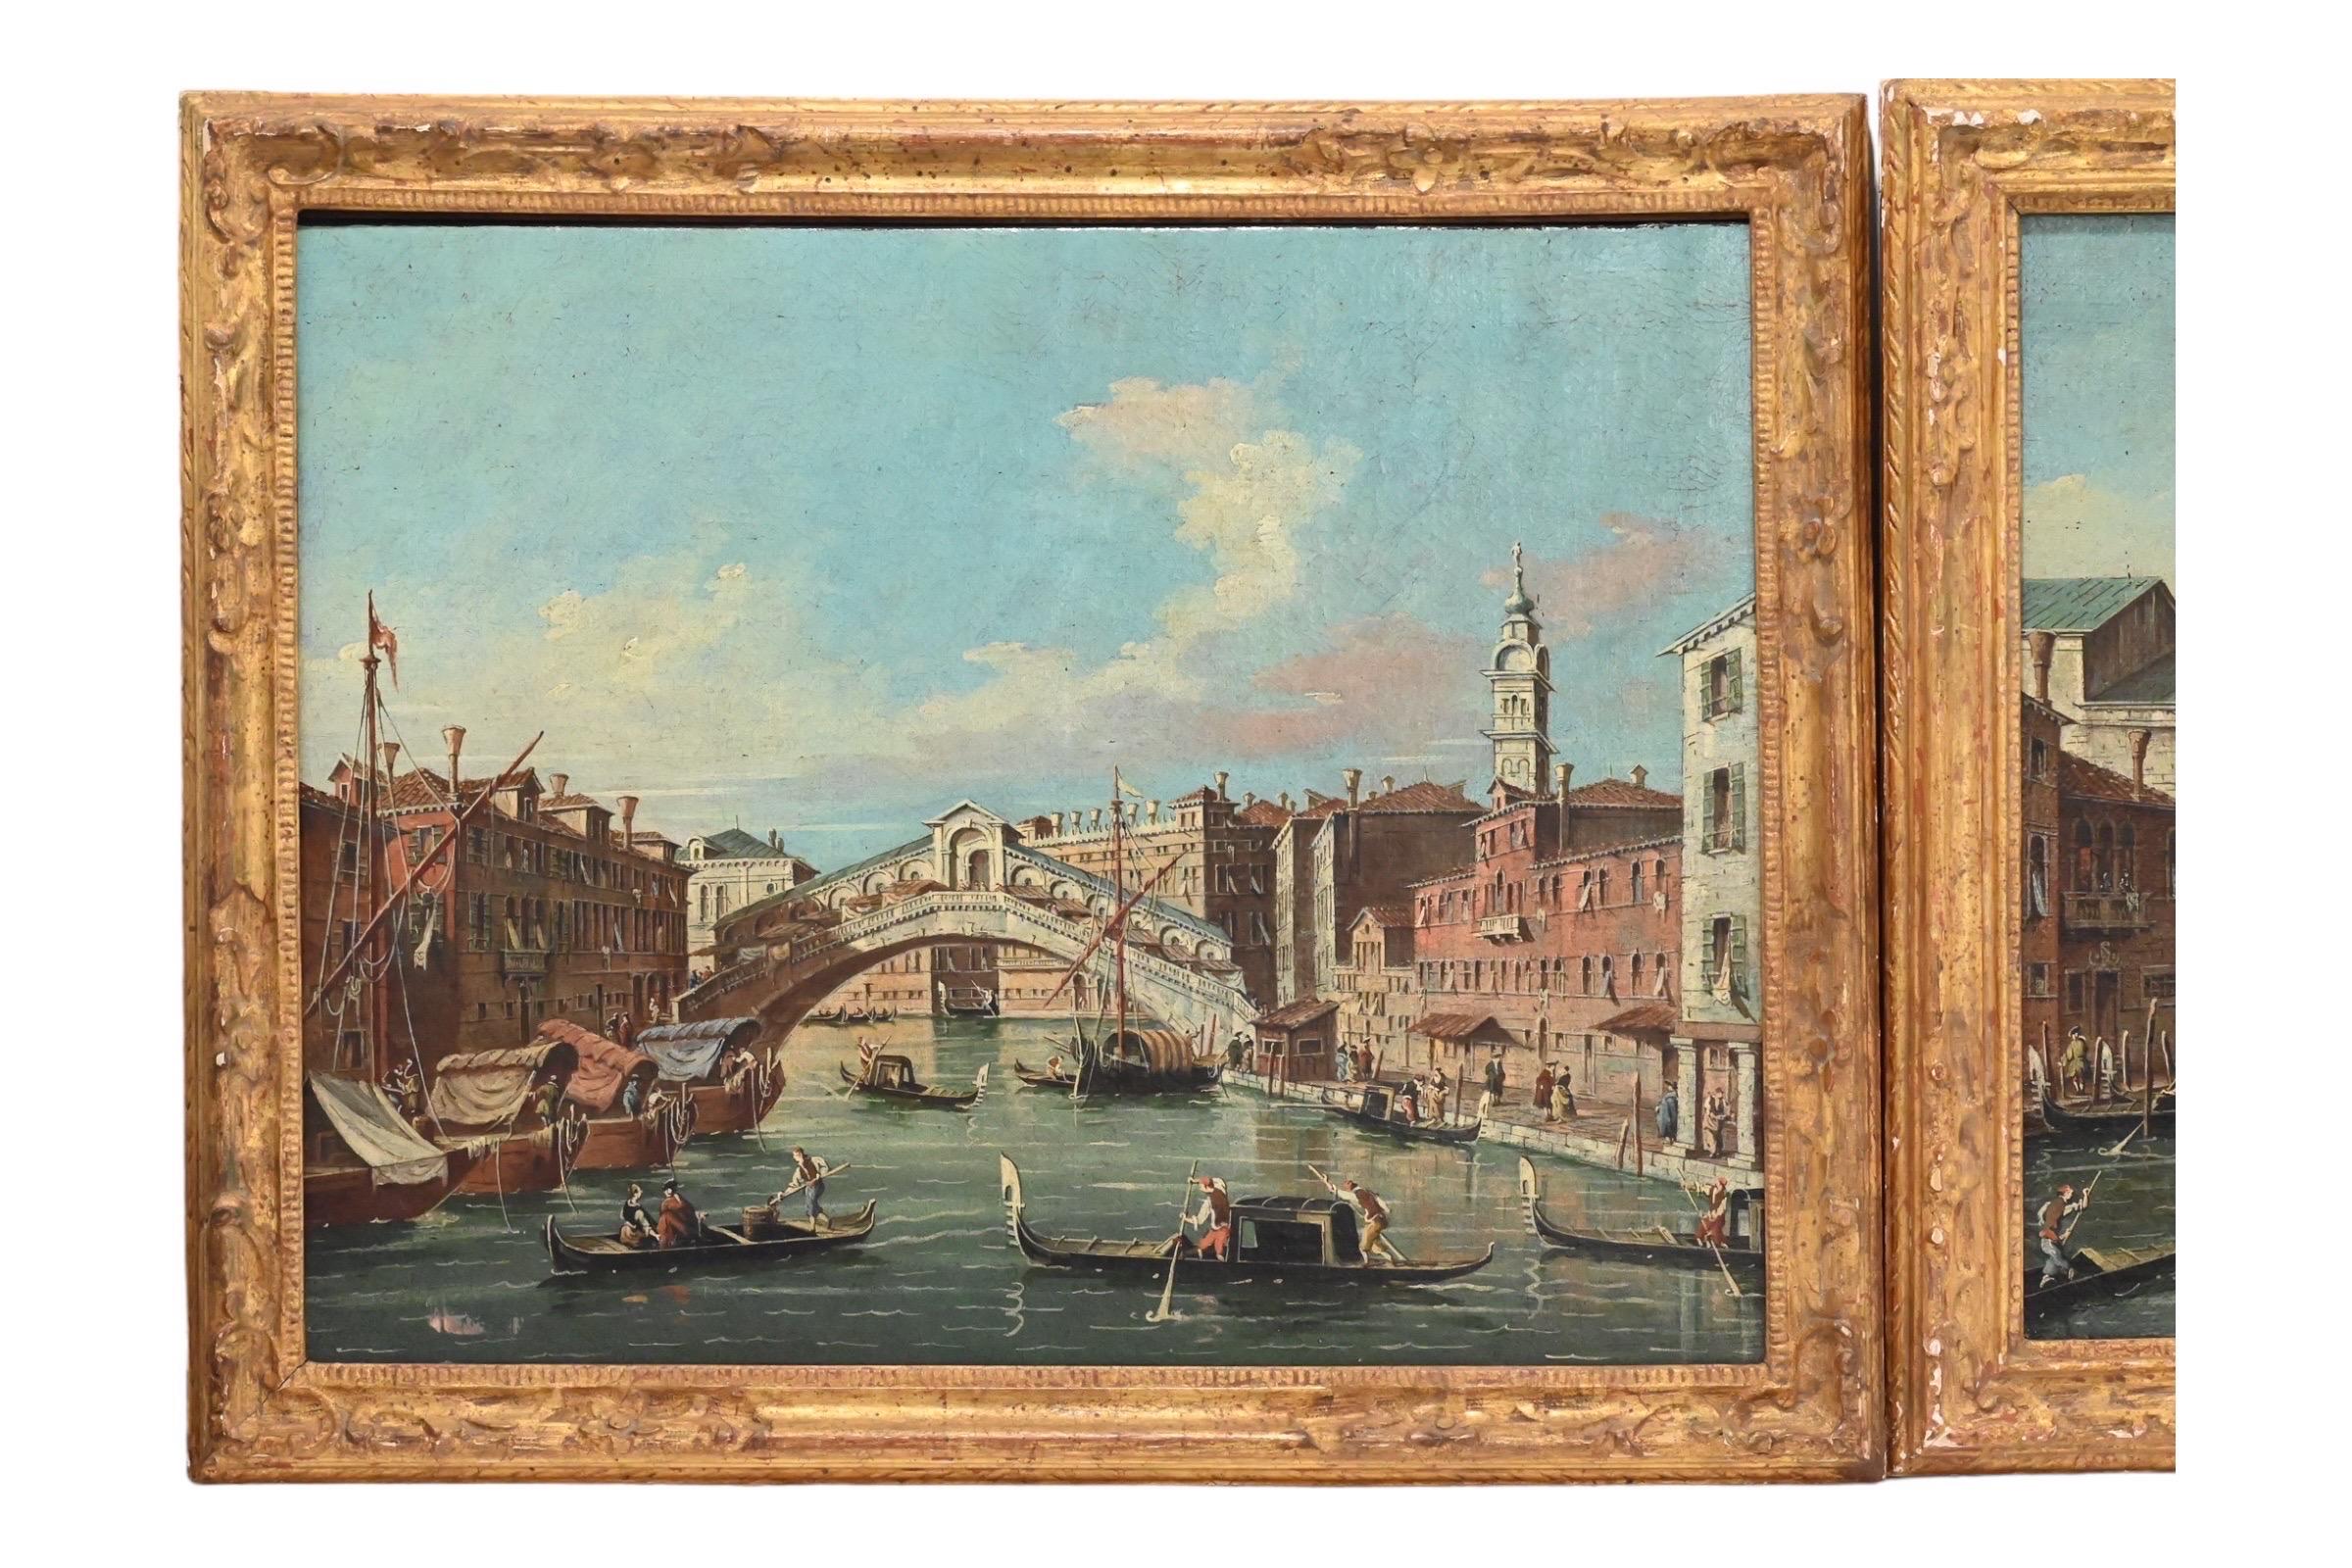 This is a very lovely pair of Italian Venetian oil on canvas paintings with fantastic scenery with beautiful workmanship. The colors are very vivid and painted very well. The details  of the figures, boats, and surrounding details are exceptionally